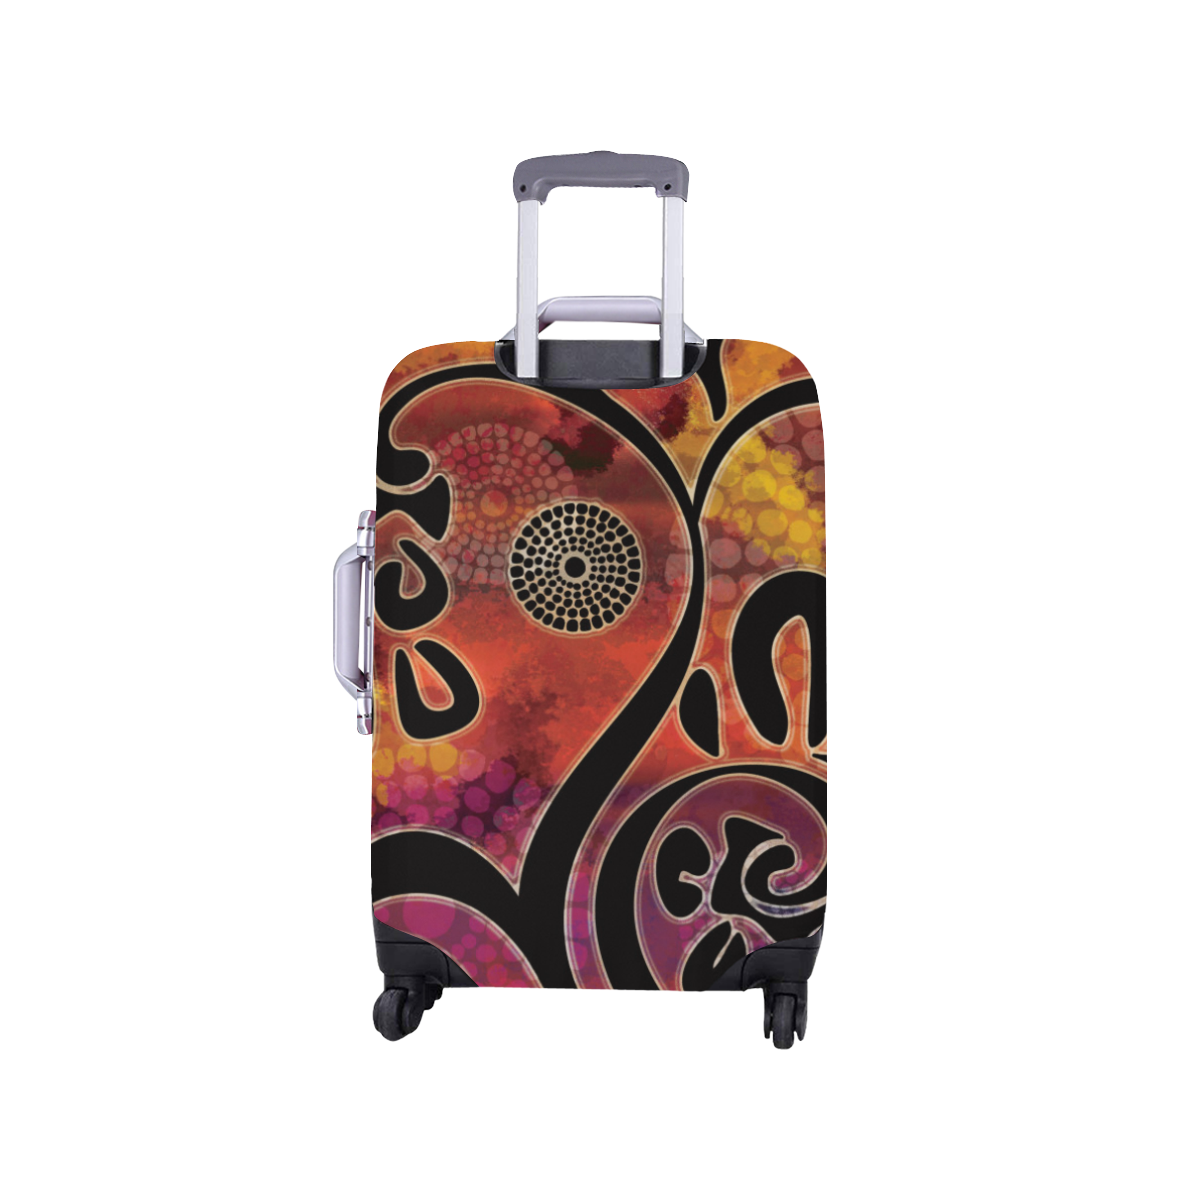 exotic vines 3 Luggage Cover/Small 18"-21"